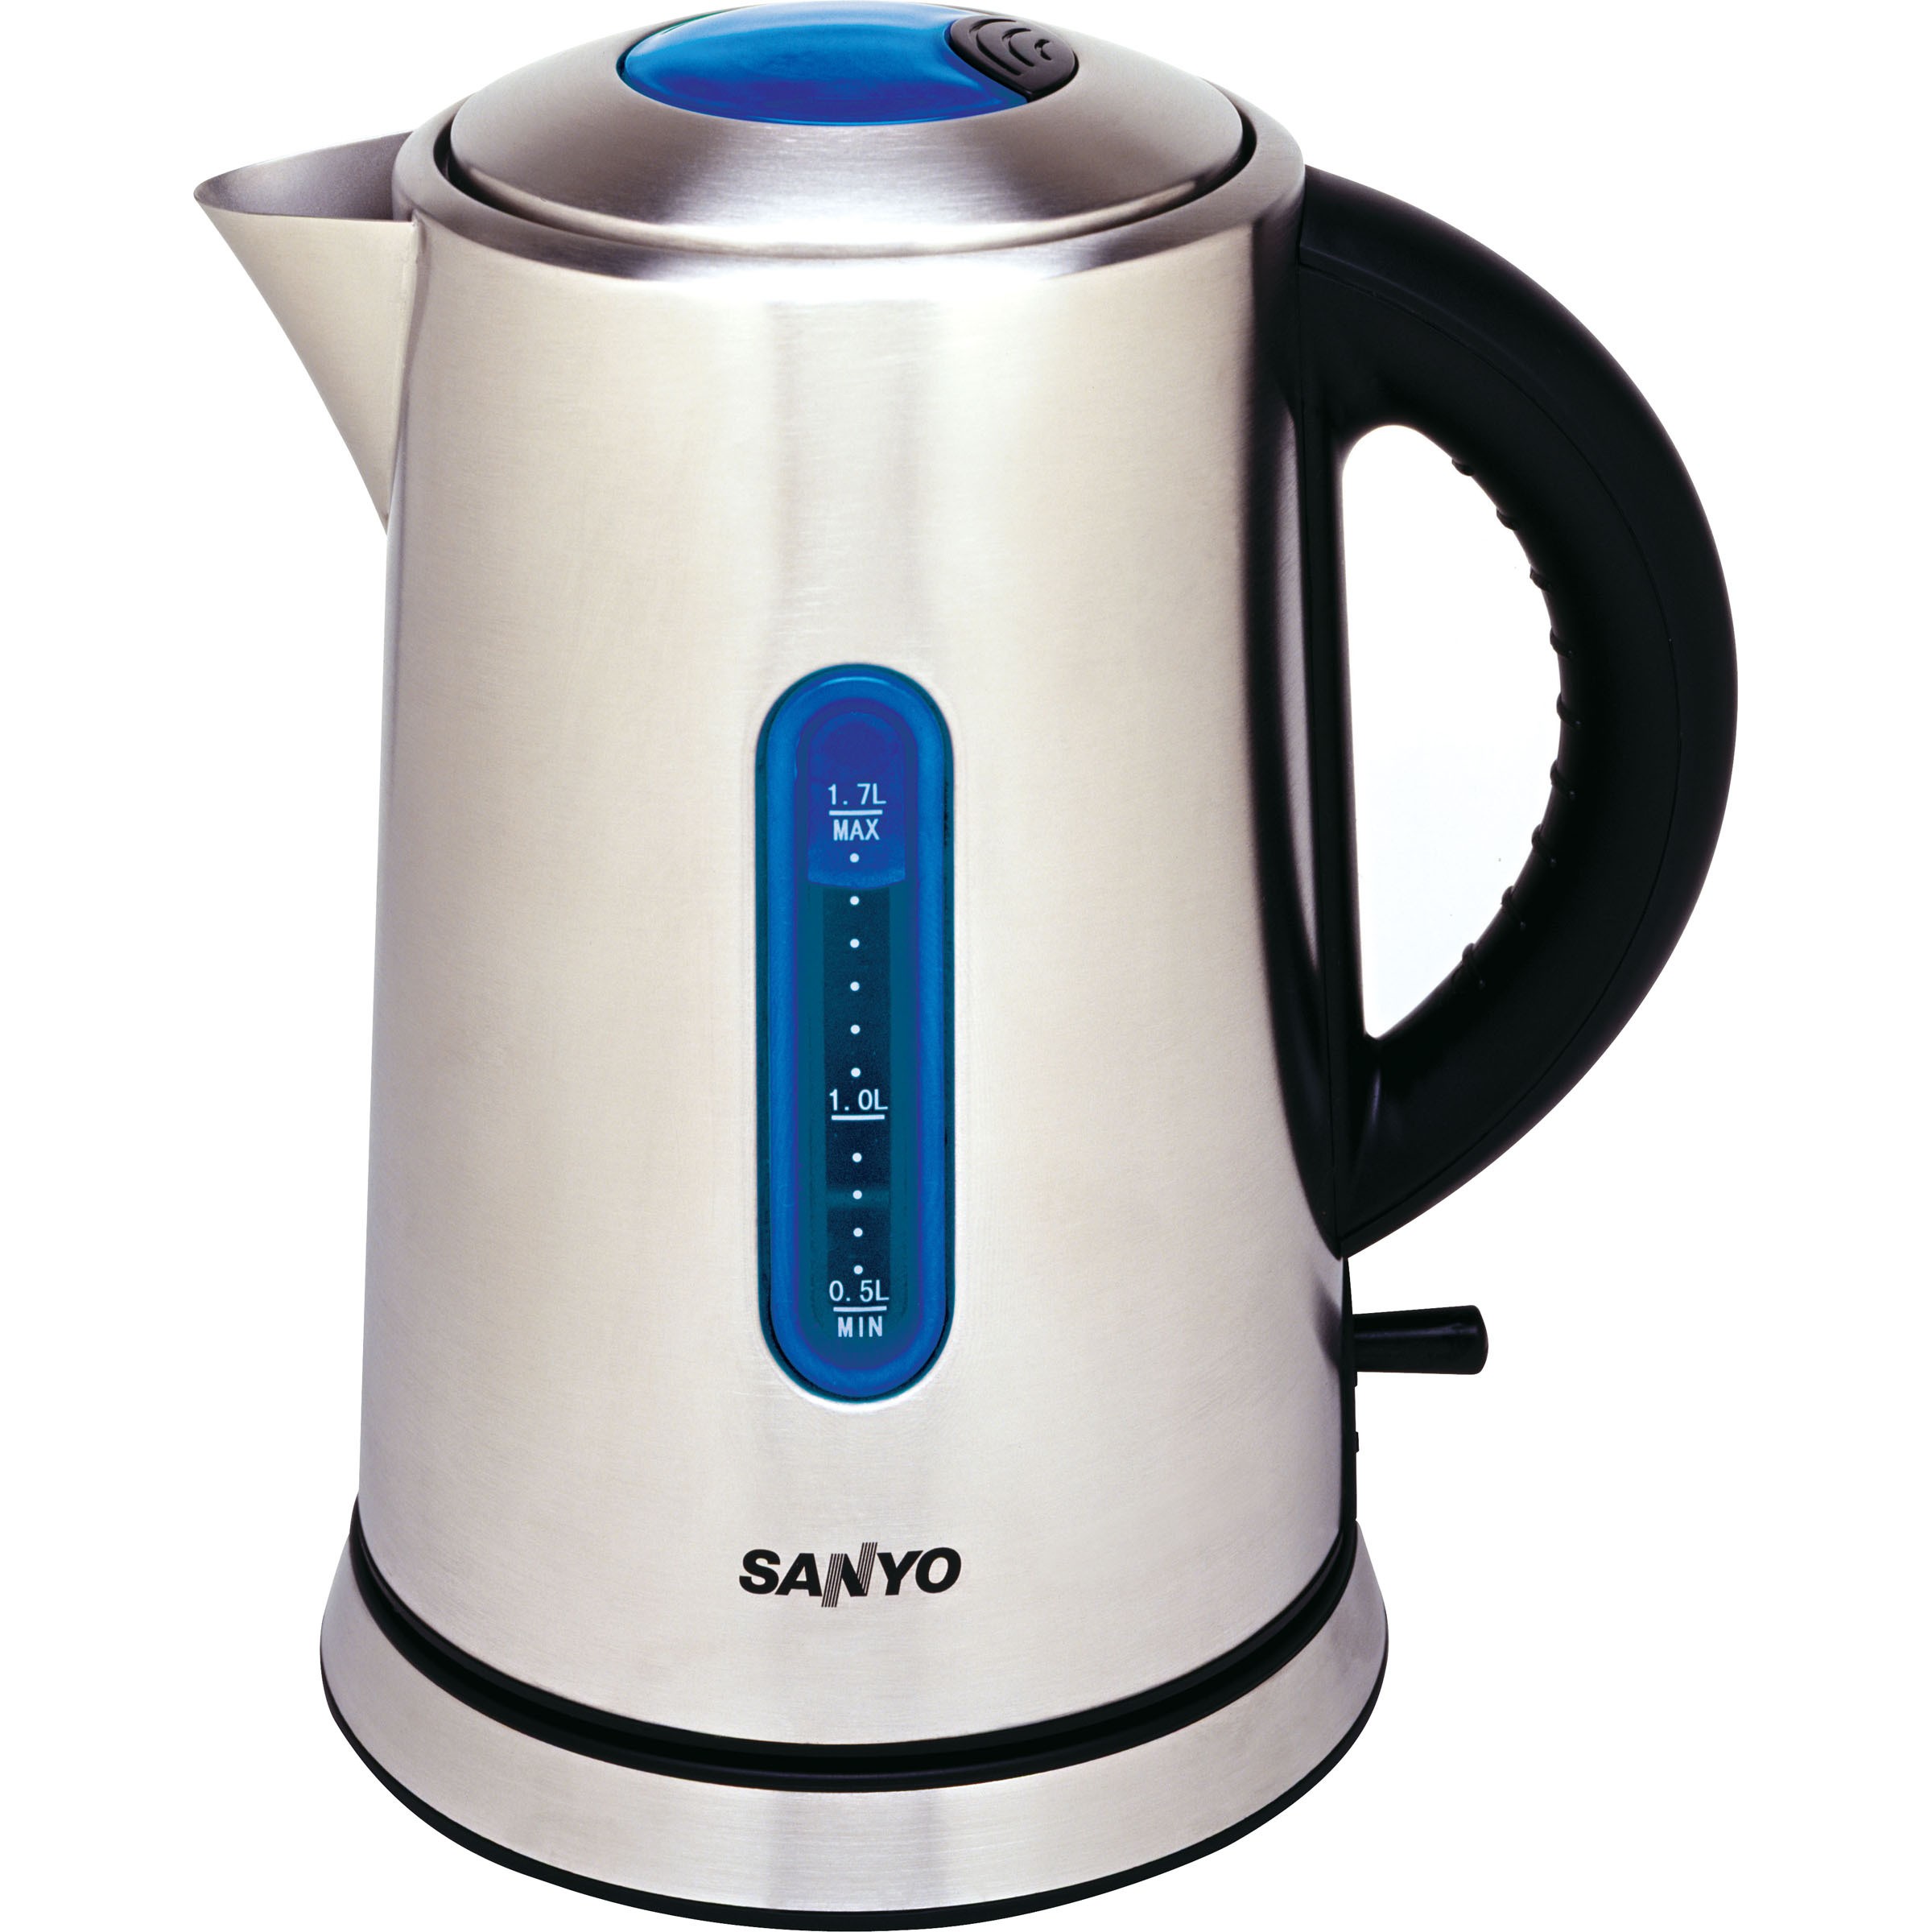 Sanyo Electric Kettle Stainless Steel 